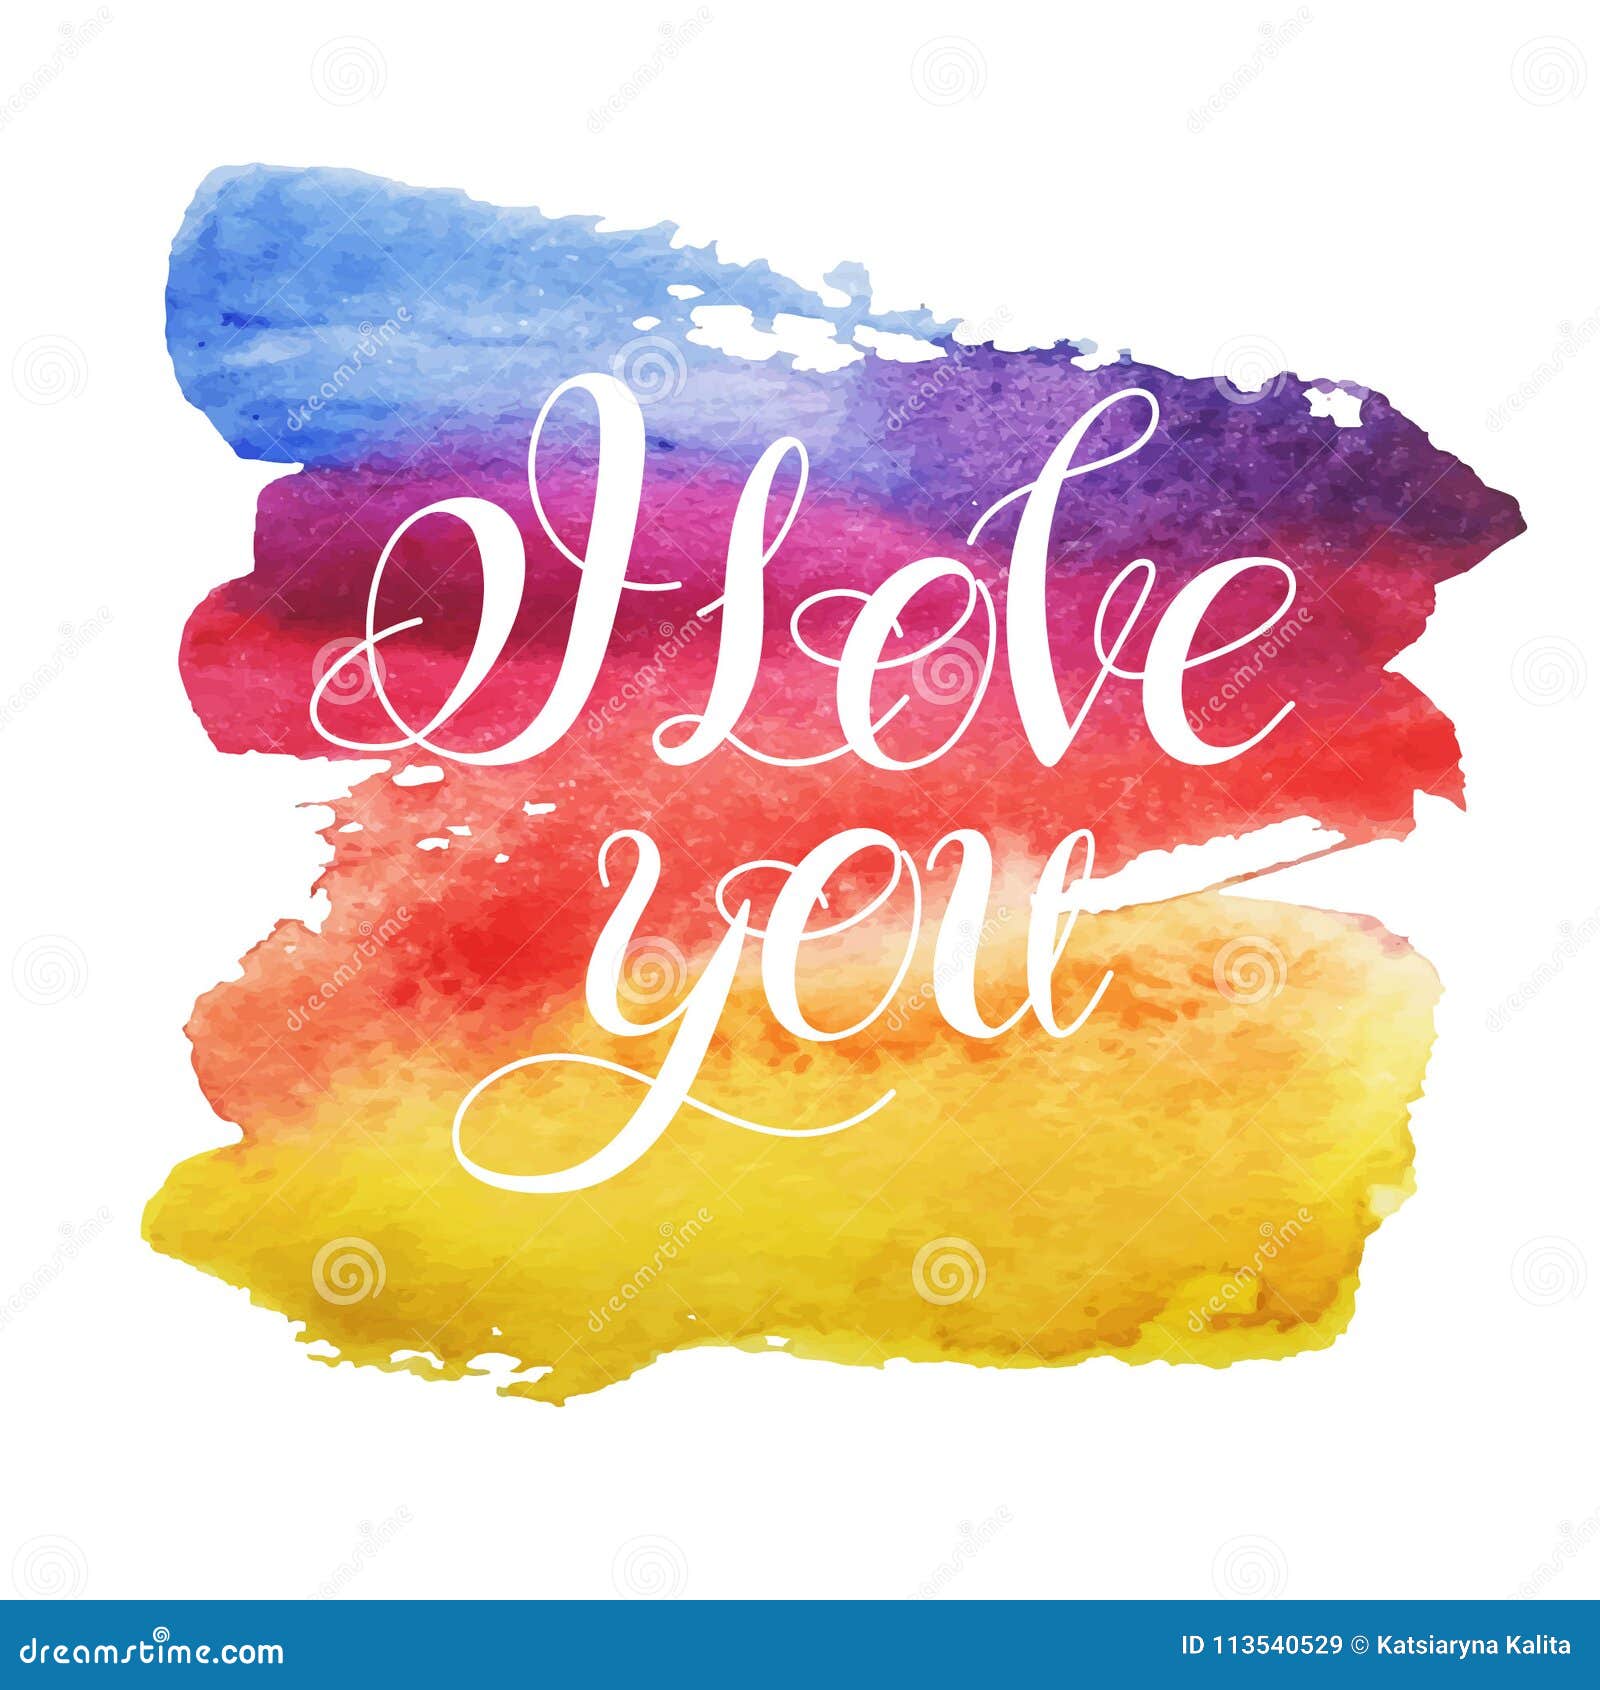 I Love You Vector Image Watercolor Elements Stock Vector ...